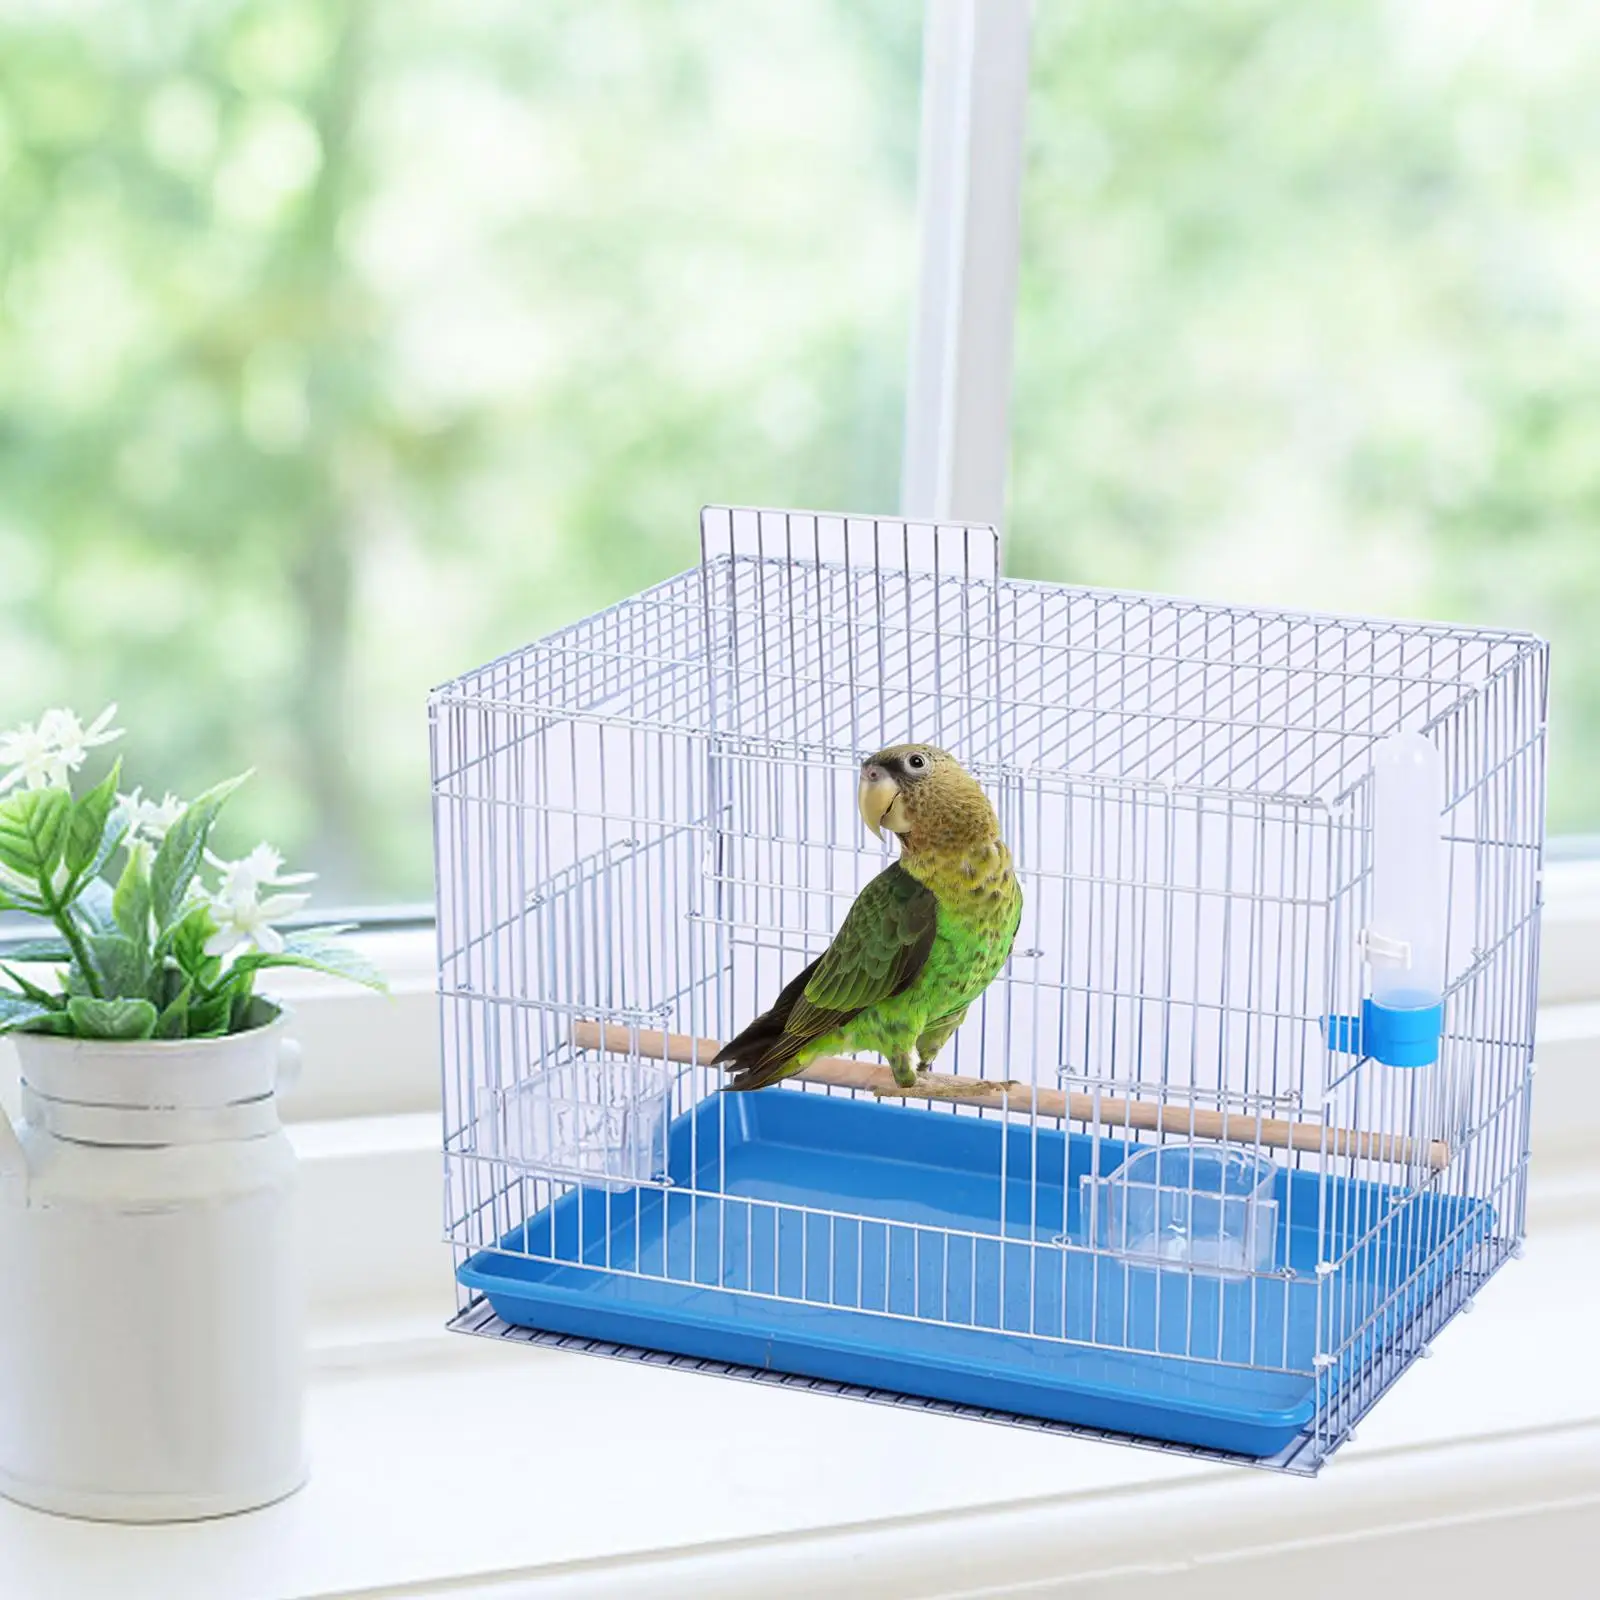 Large Bird Cage Bird Feeder Waterer Stand Cage House Pet Supplies Birdcage Nest for Parrot Lovebirds Budgies Conures Accessories